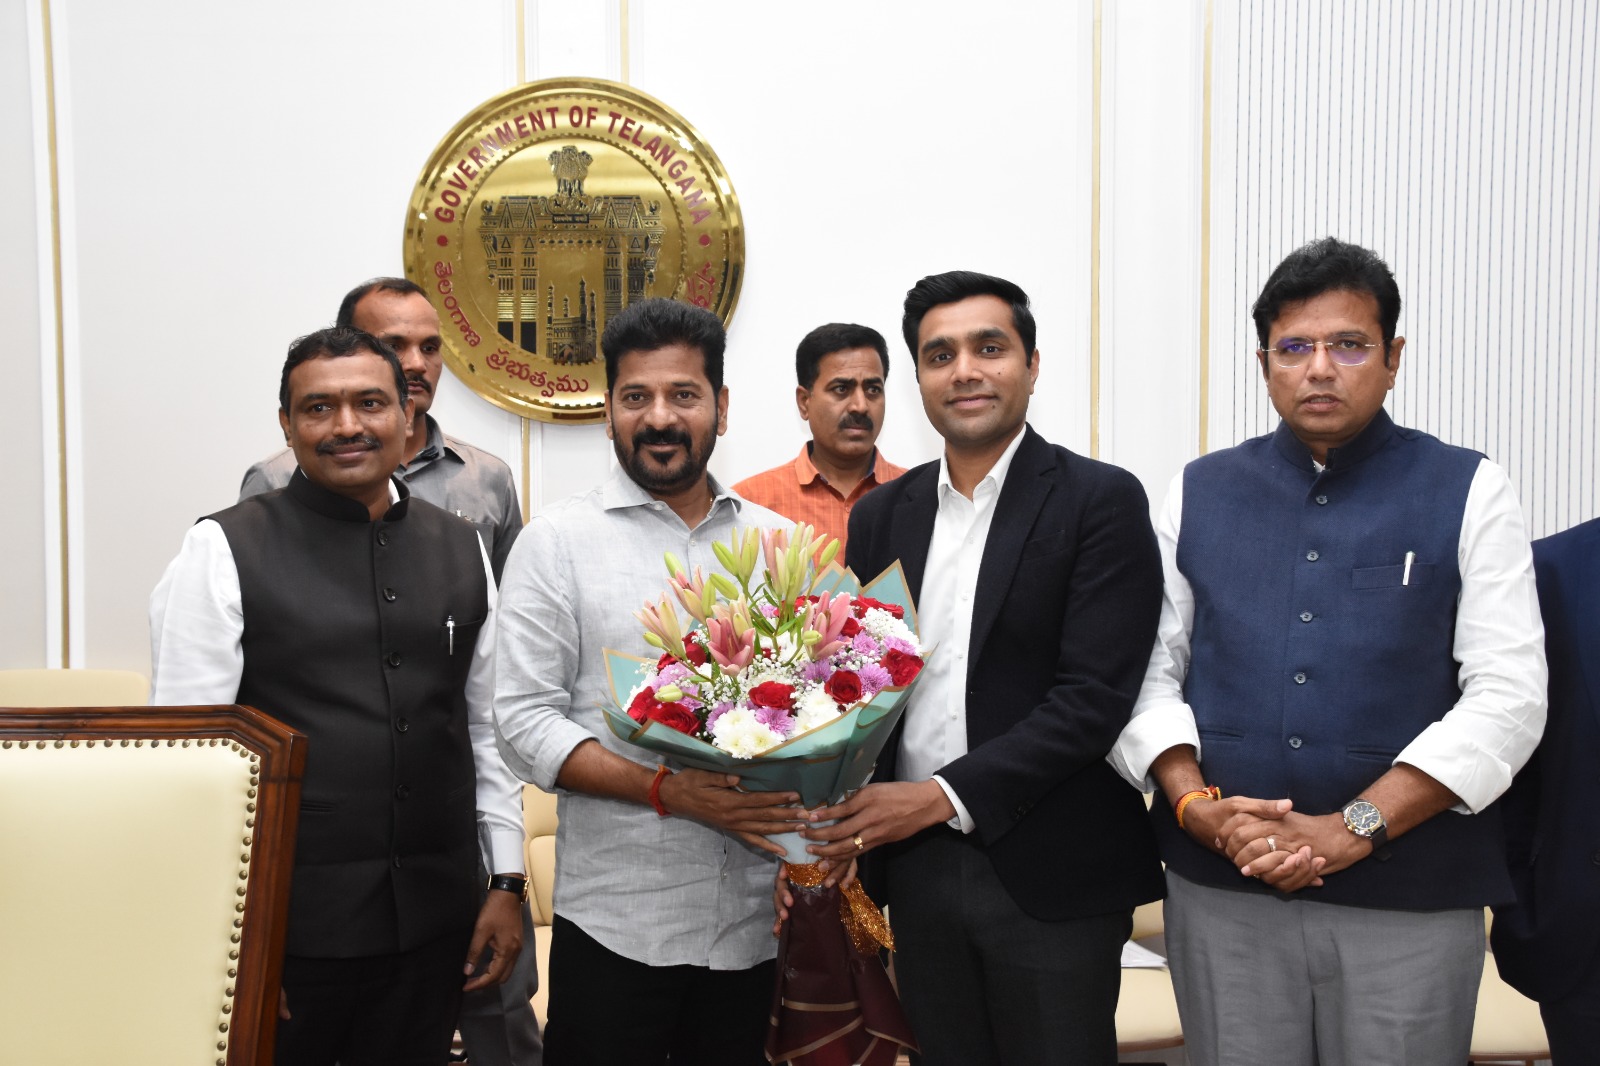 A delegation from the Adani Group, along with Karan Adani, Ports and SEZ CEO, met Chief Minister Revanth Reddy in Hyderabad. (X)